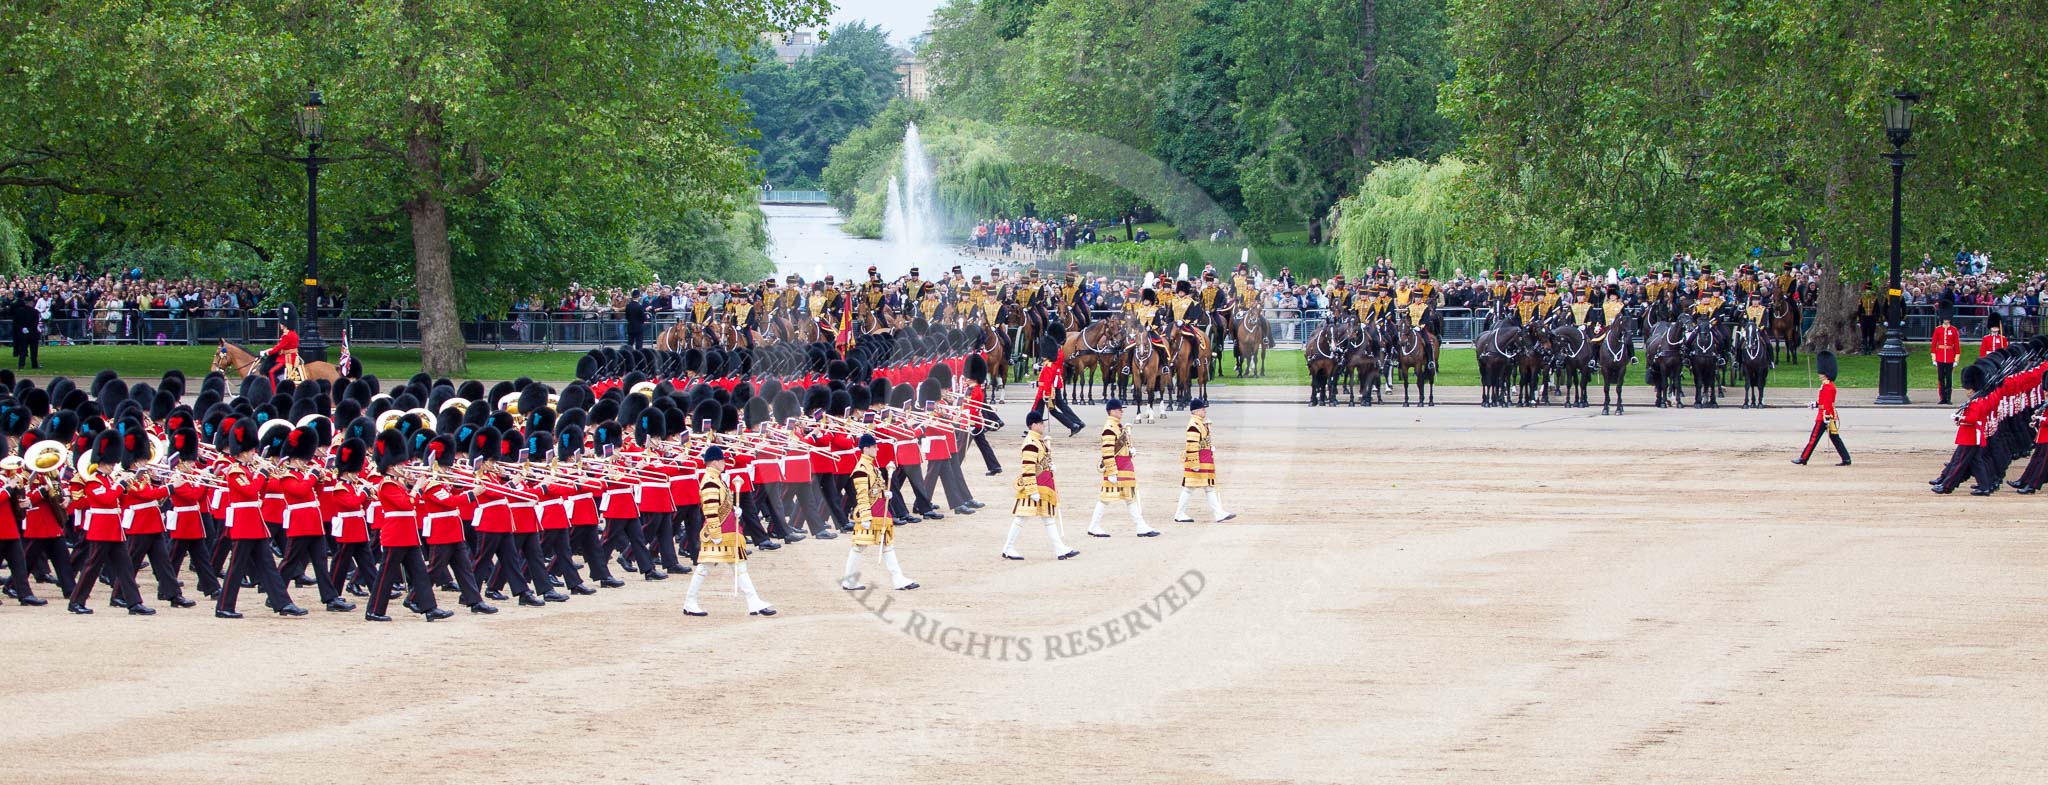 Trooping the Colour 2012: With the Massed Bands playing, the March Past begins..
Horse Guards Parade, Westminster,
London SW1,

United Kingdom,
on 16 June 2012 at 11:32, image #374